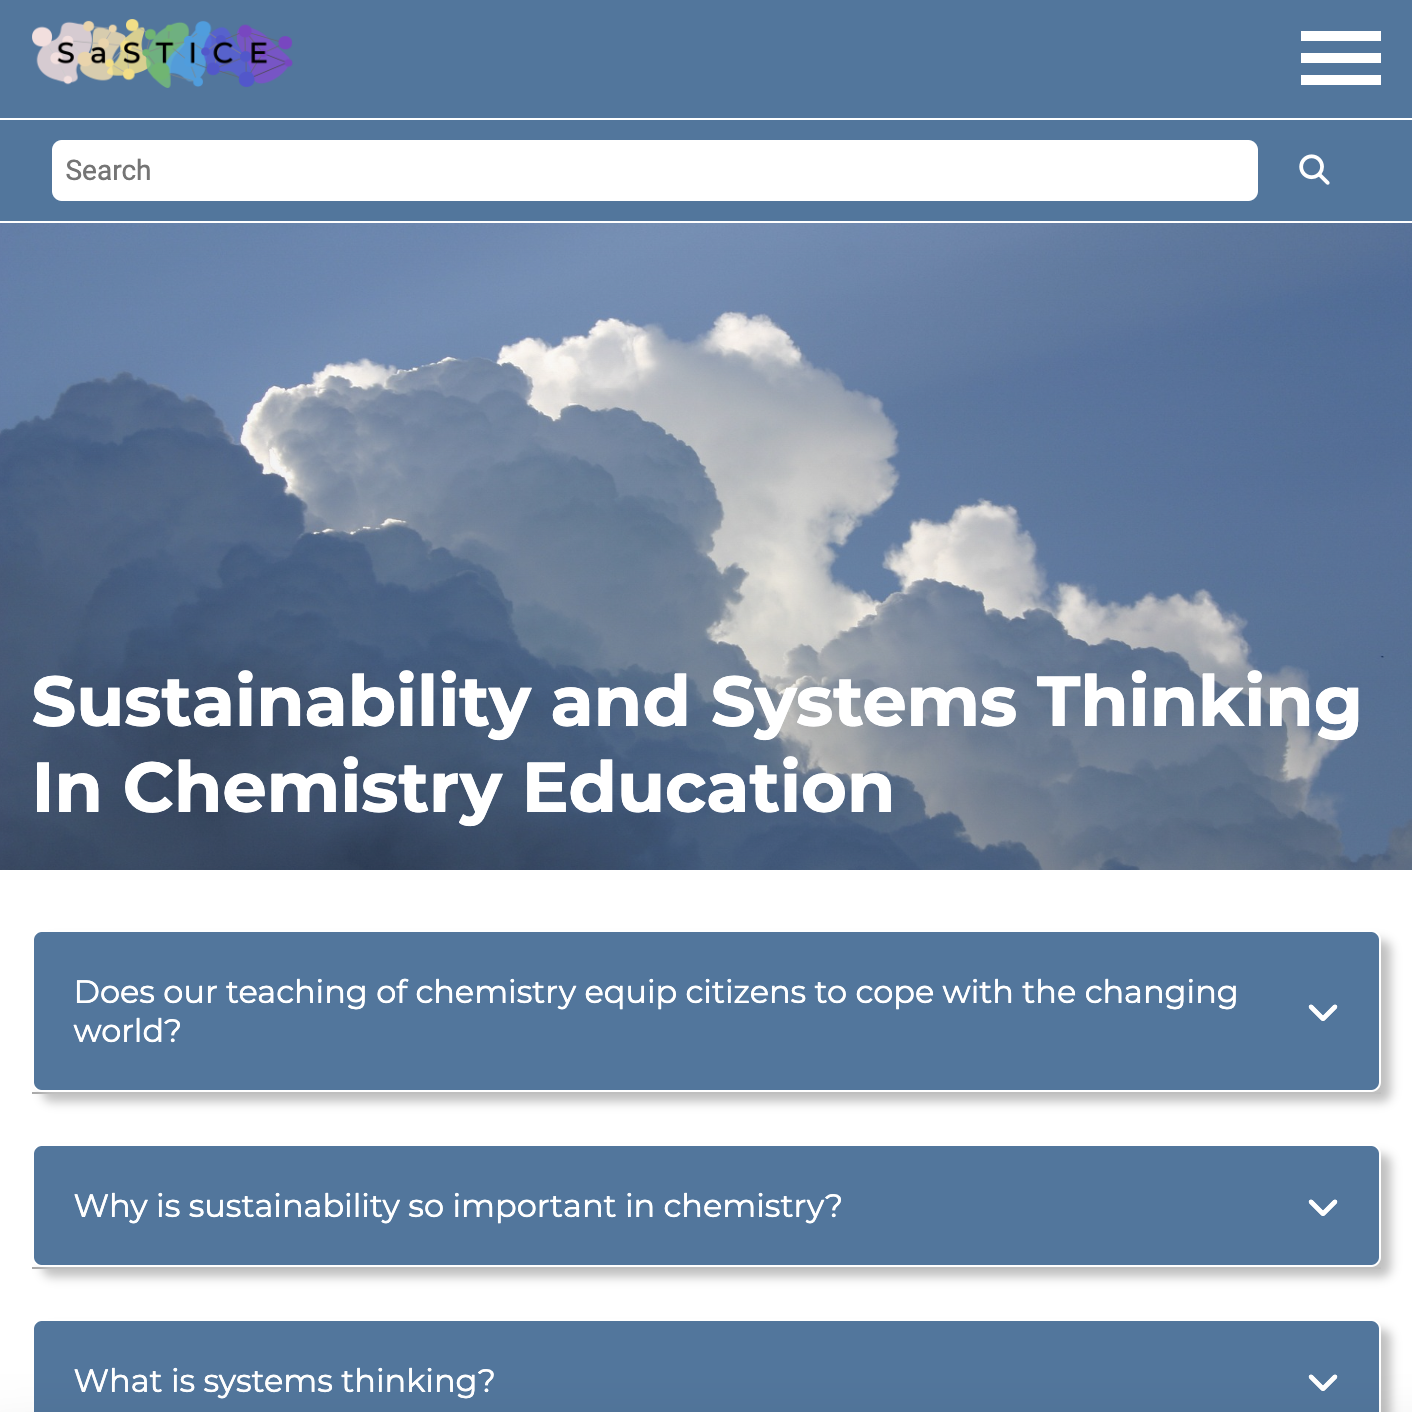 A screenshot of the home page of the Sustainability and Systems Thinking In Chemistry Education website. It shows the navigation bar, the search bar, the name of the website, and three informational drop downs.